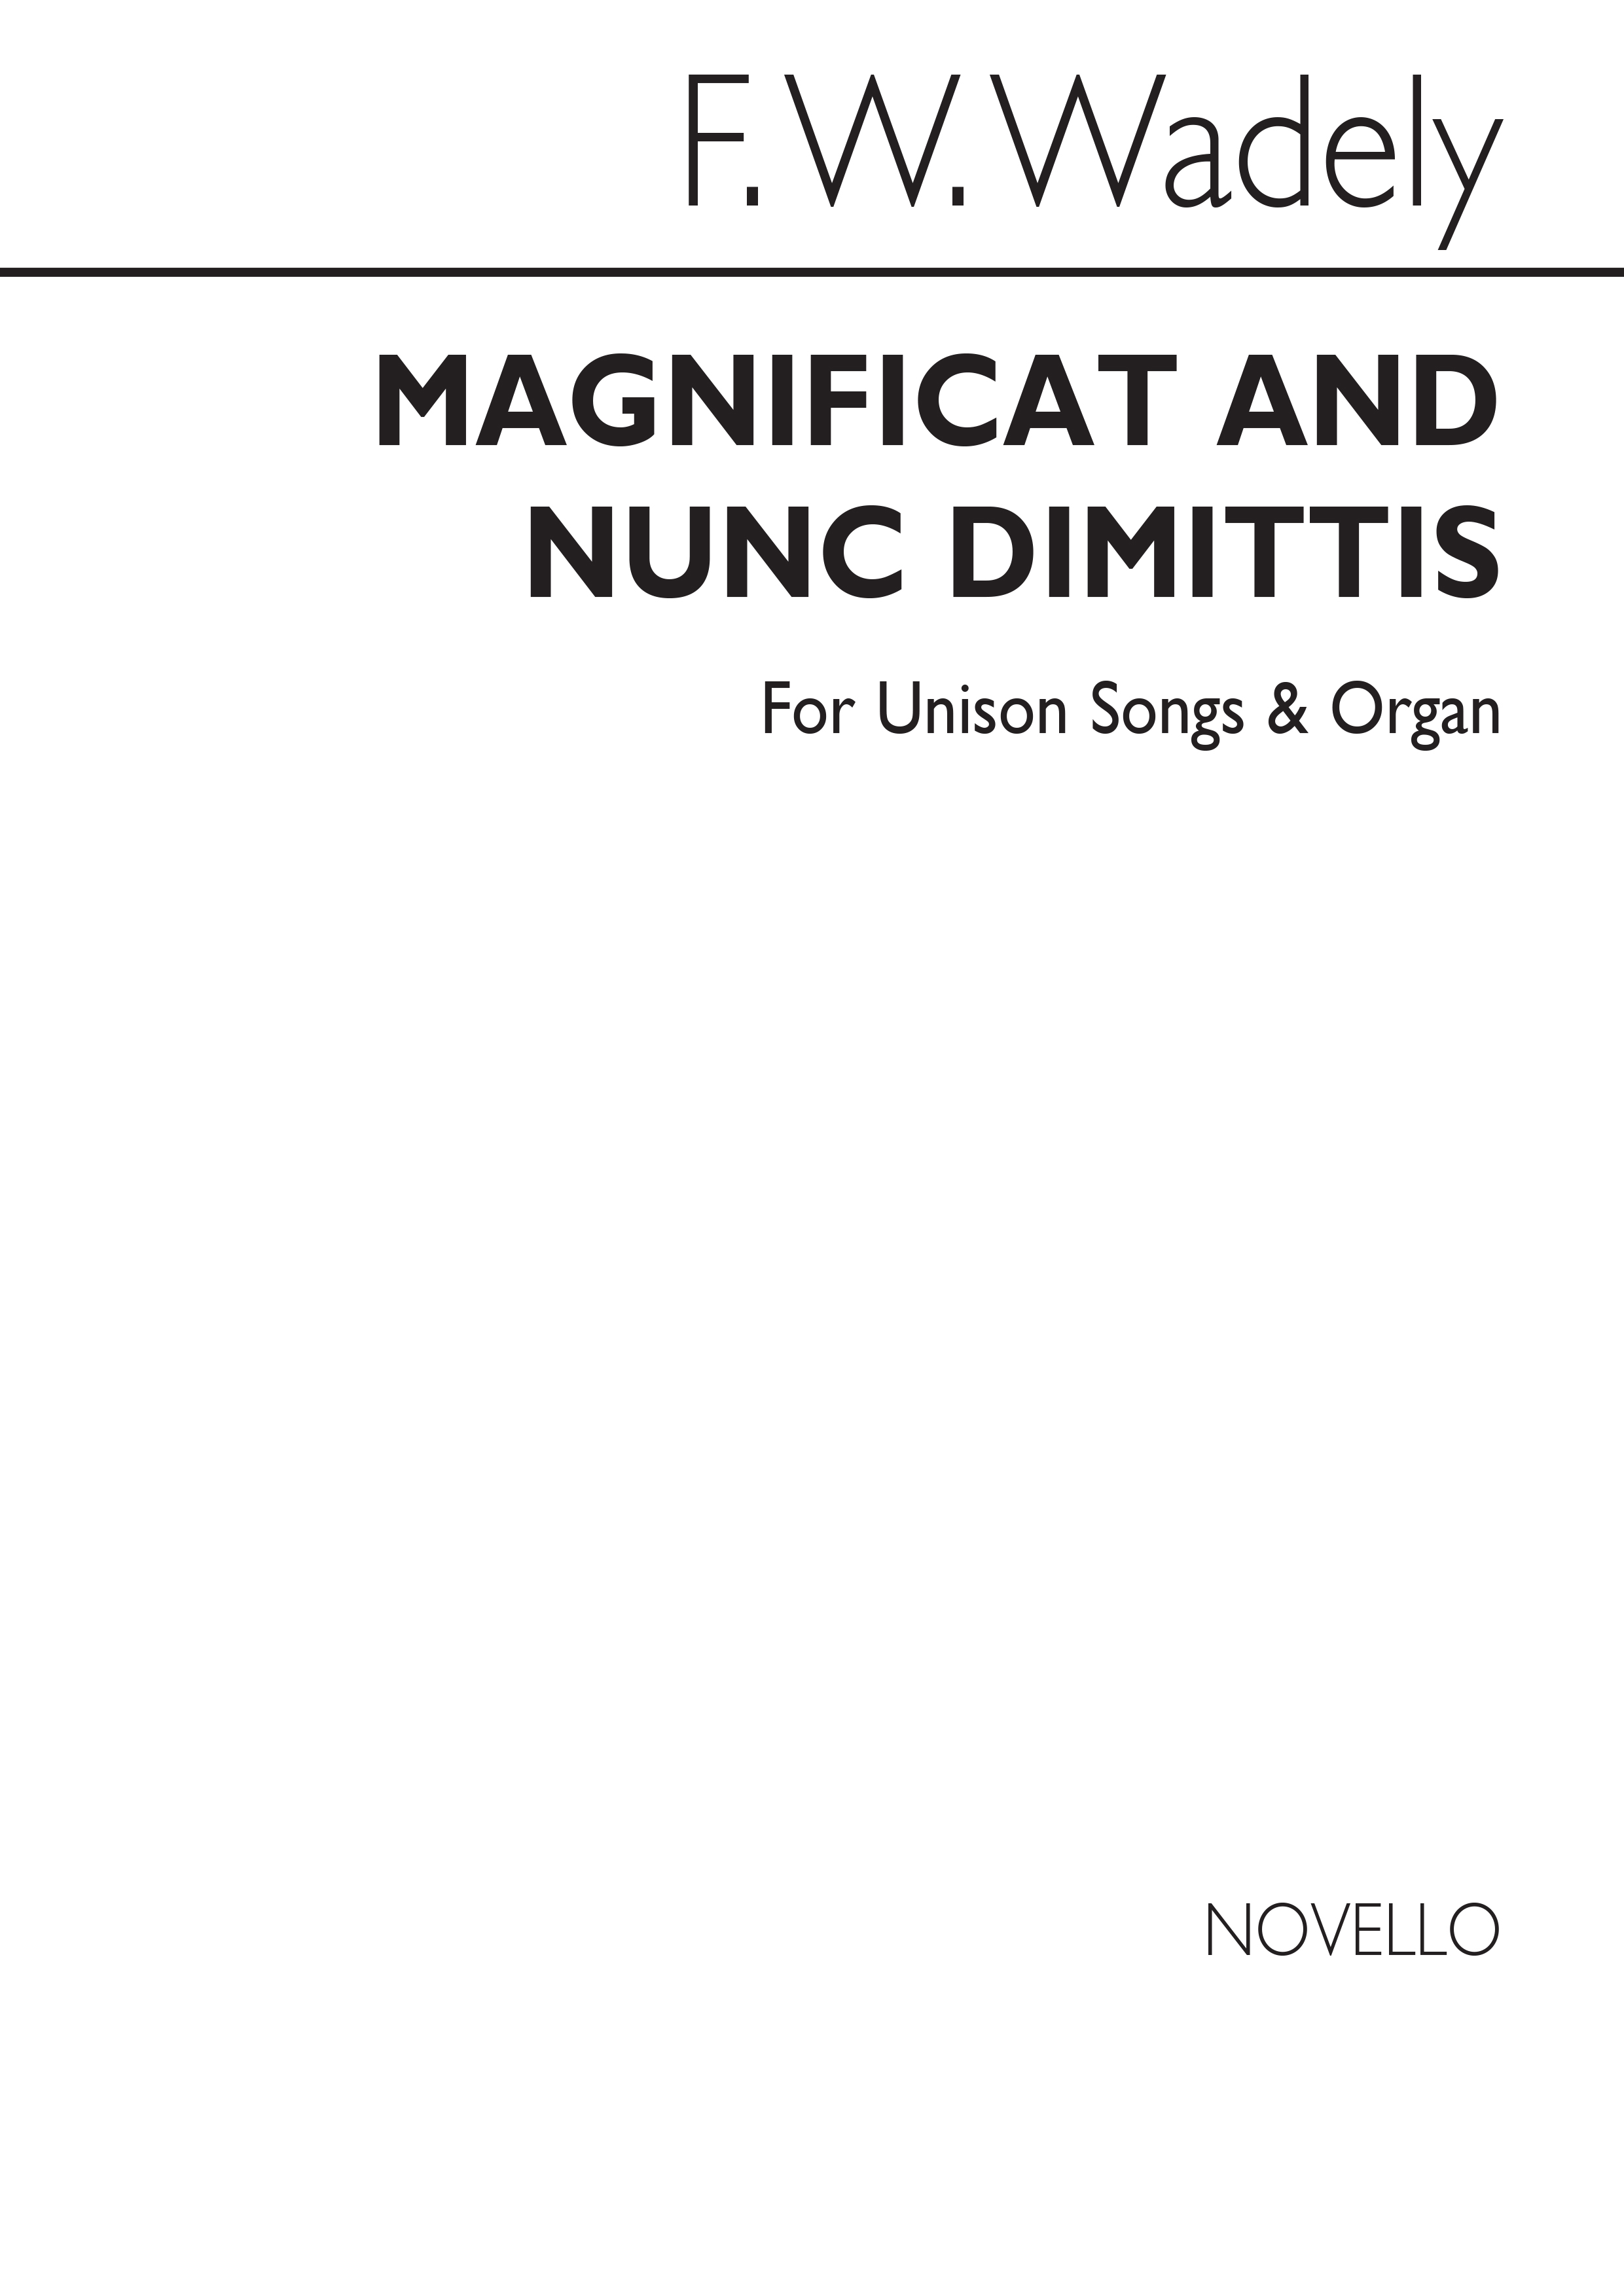 Frederick W. Wadely: Magnificat And Nunc Dimittis In E Flat Unison/Organ